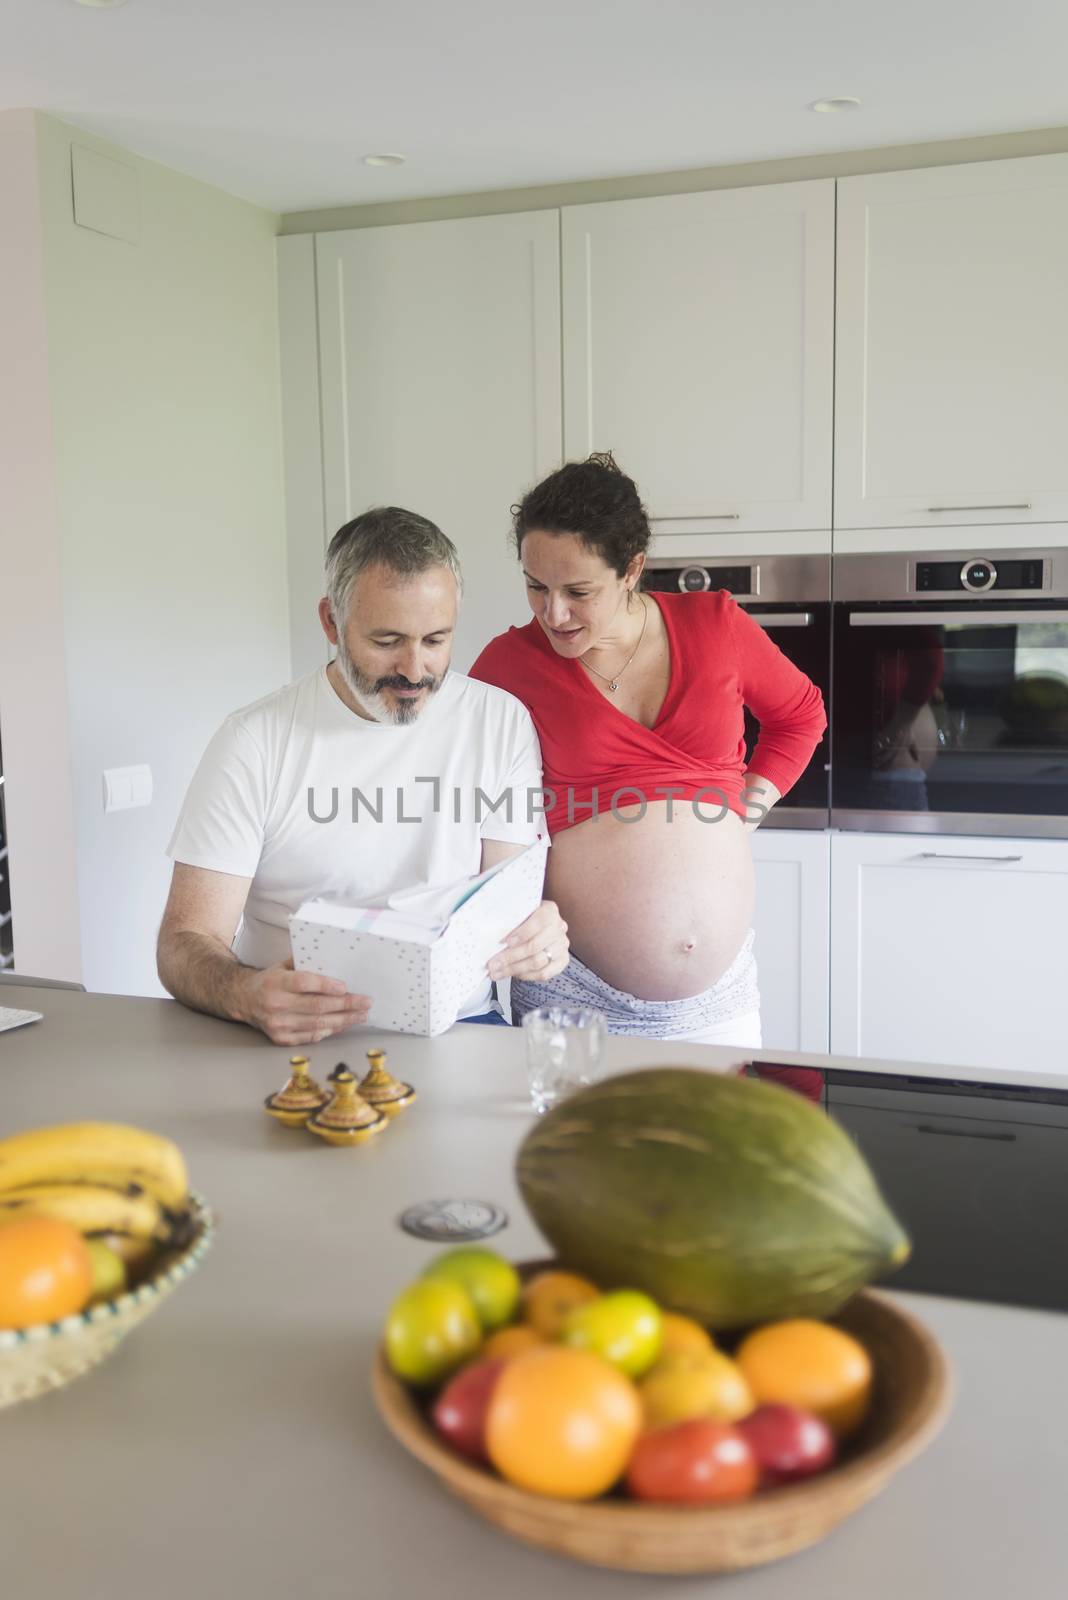 Happy pregnant woman with her husband sitting at home. Smiling couple consulting a book at the kitchen. by raferto1973